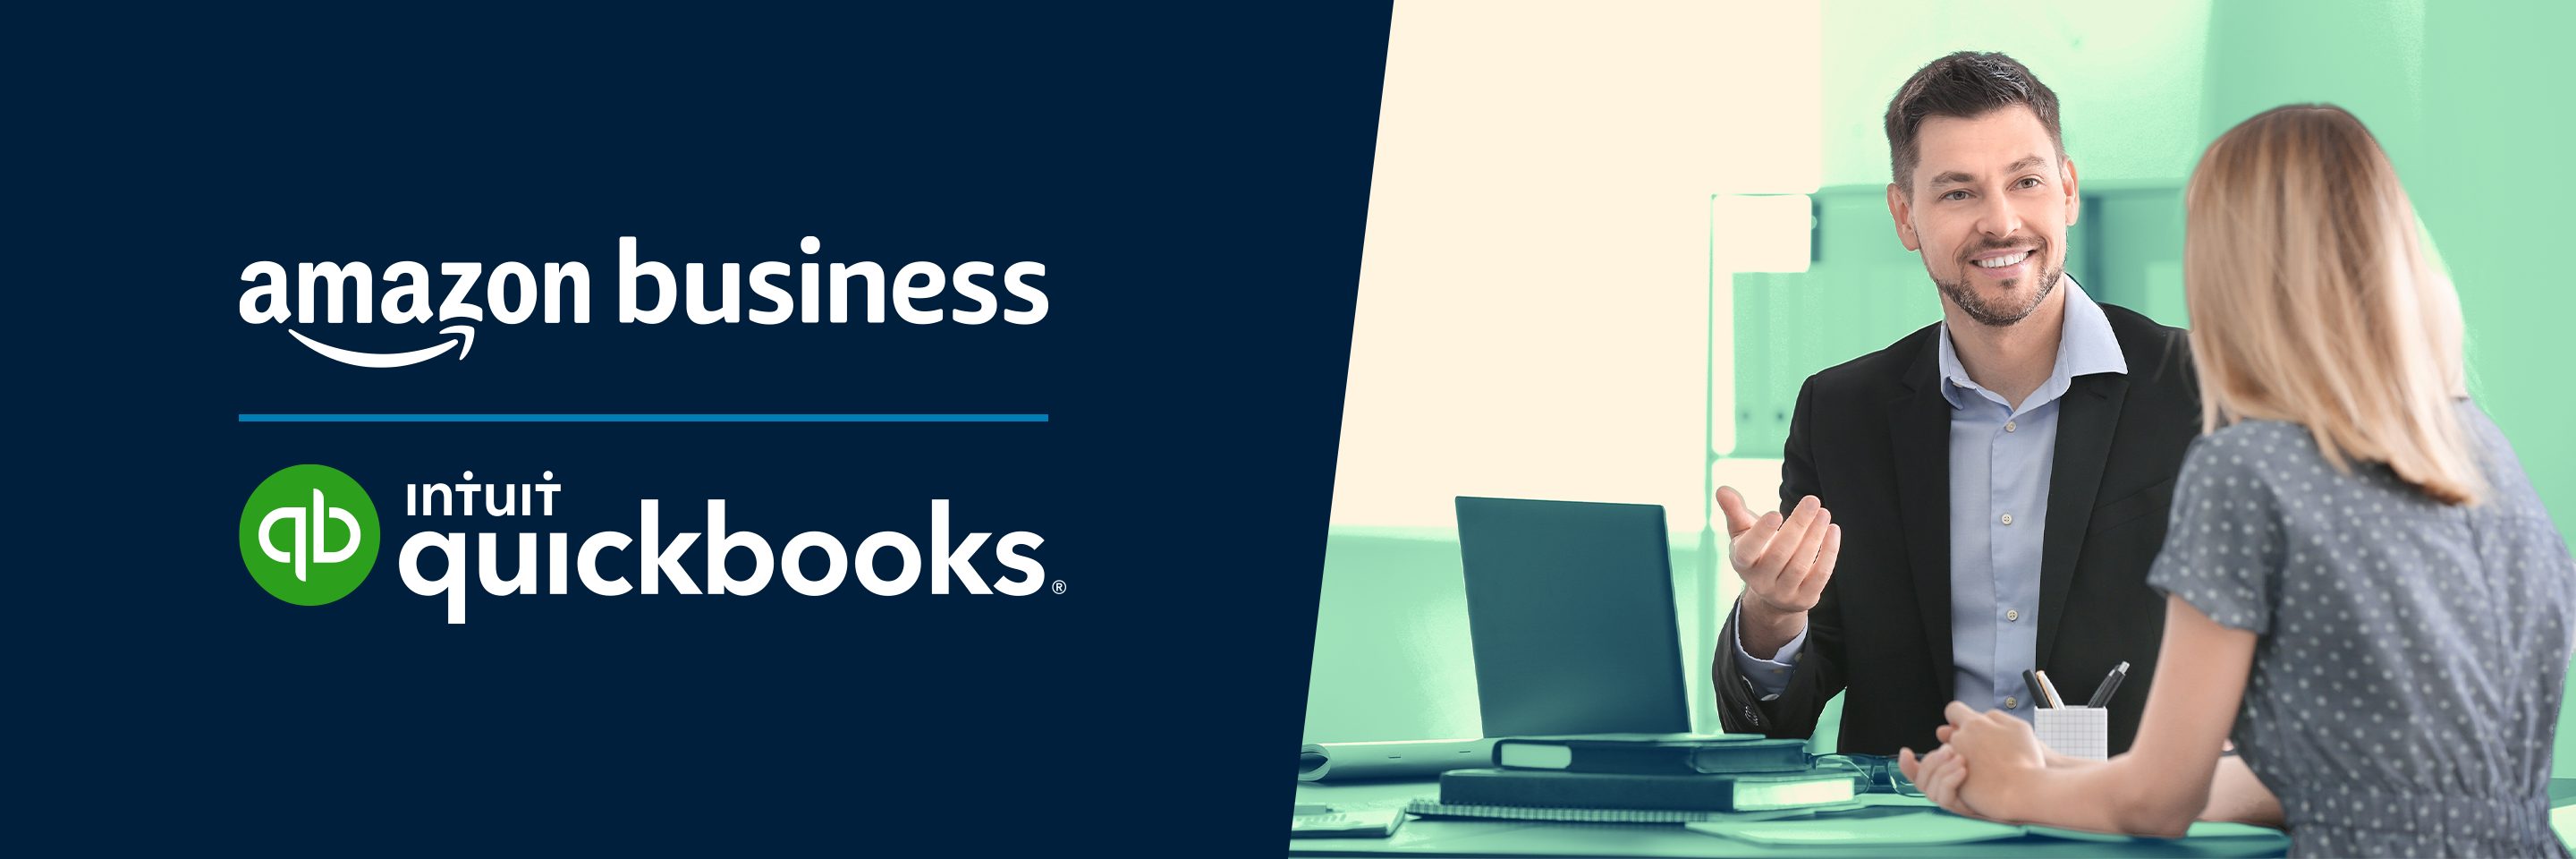 Amazon Business + Quick Books: Four Financial Experts & How They Can Help Your Business